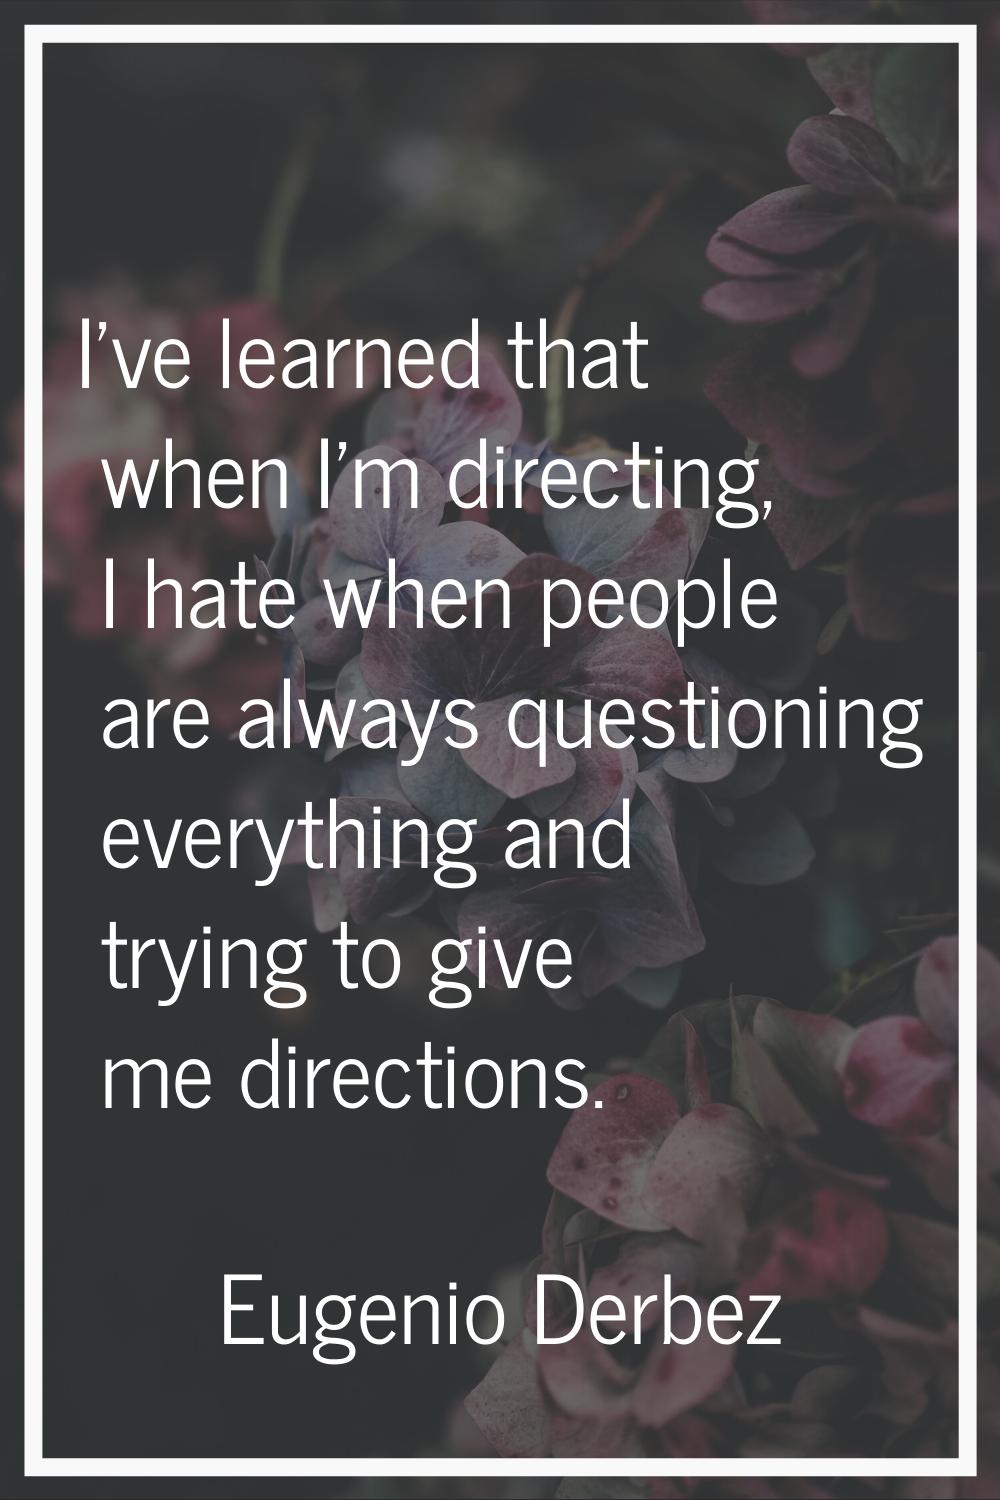 I've learned that when I'm directing, I hate when people are always questioning everything and tryi